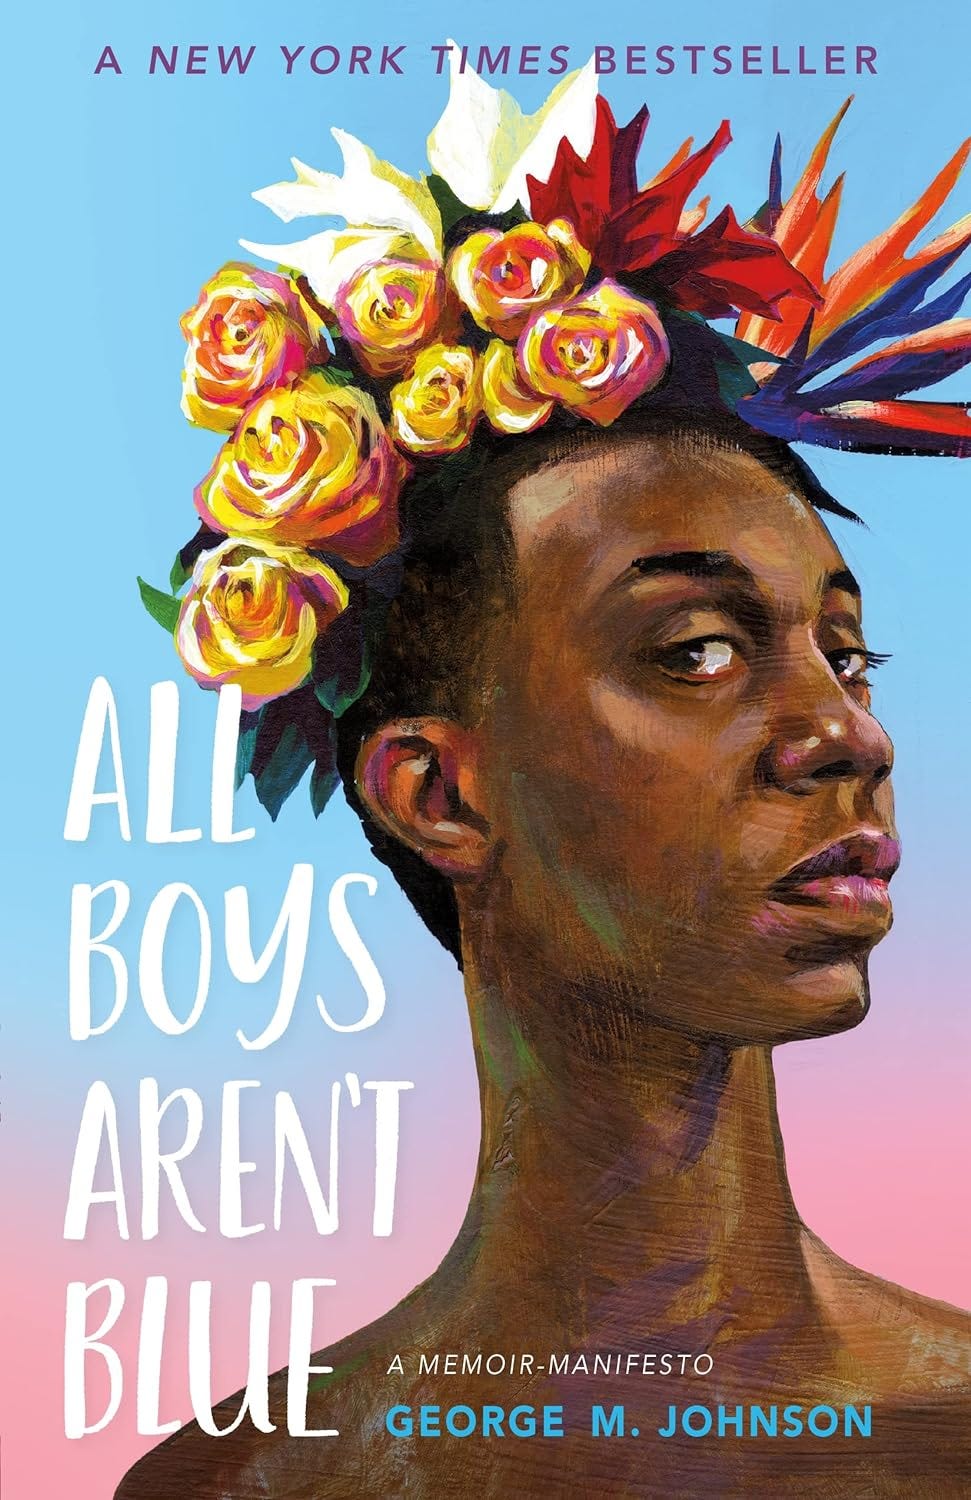 The cover art for the book All Boys Aren't Blue by George M. Johnson